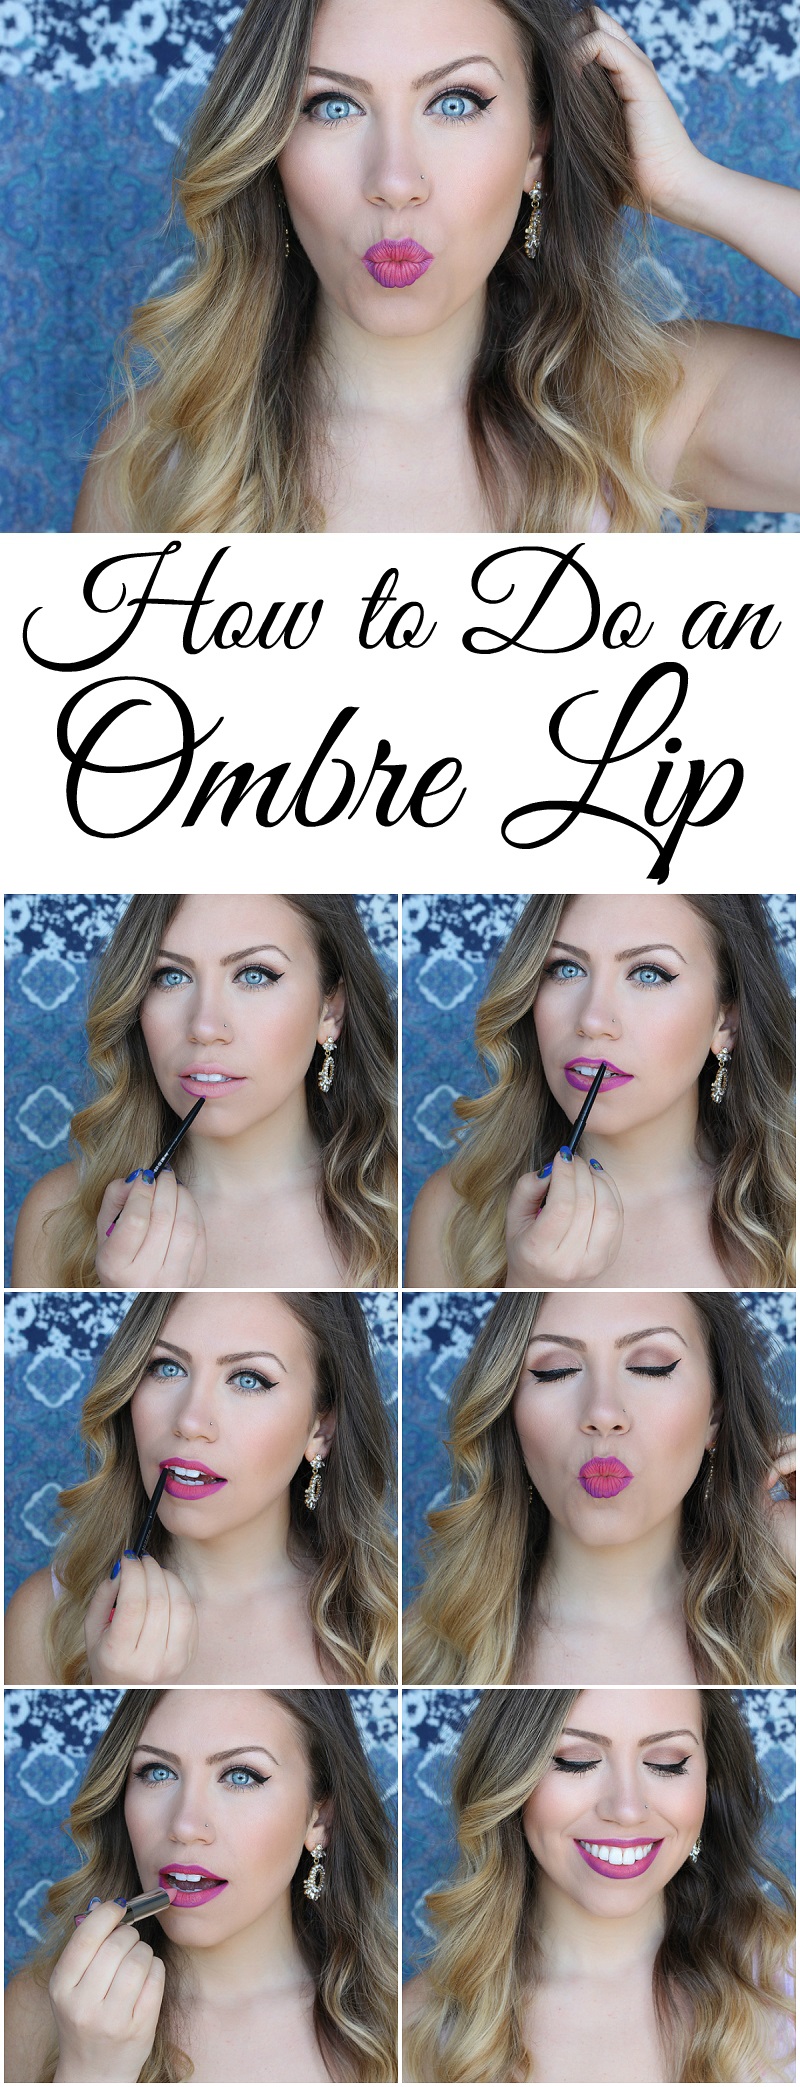 How to Do an Ombre Lip with Maybelline Color Sensational Lip Liners and Lipstick Tutorial